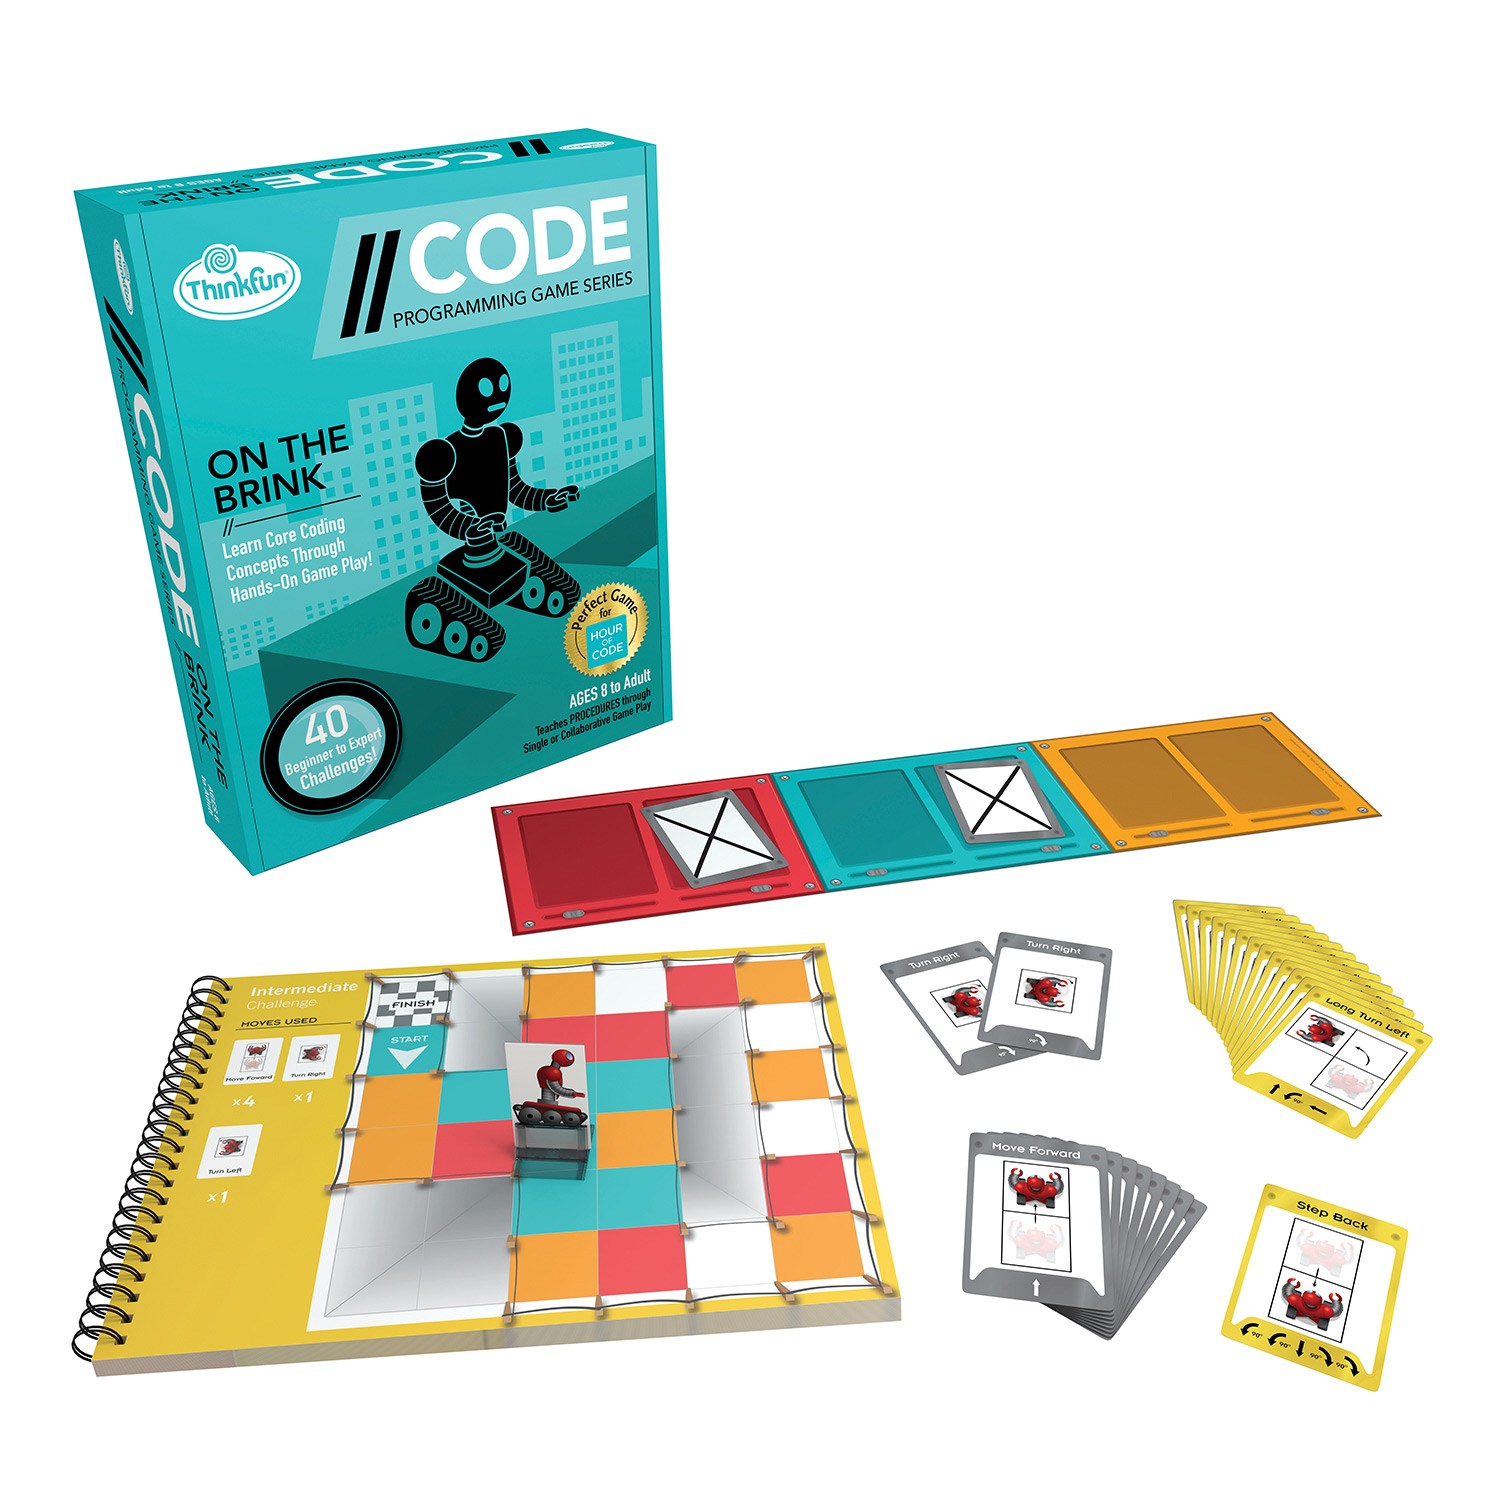 ThinkFun Last Letter Game with a fast-Paced Twist on a Classic